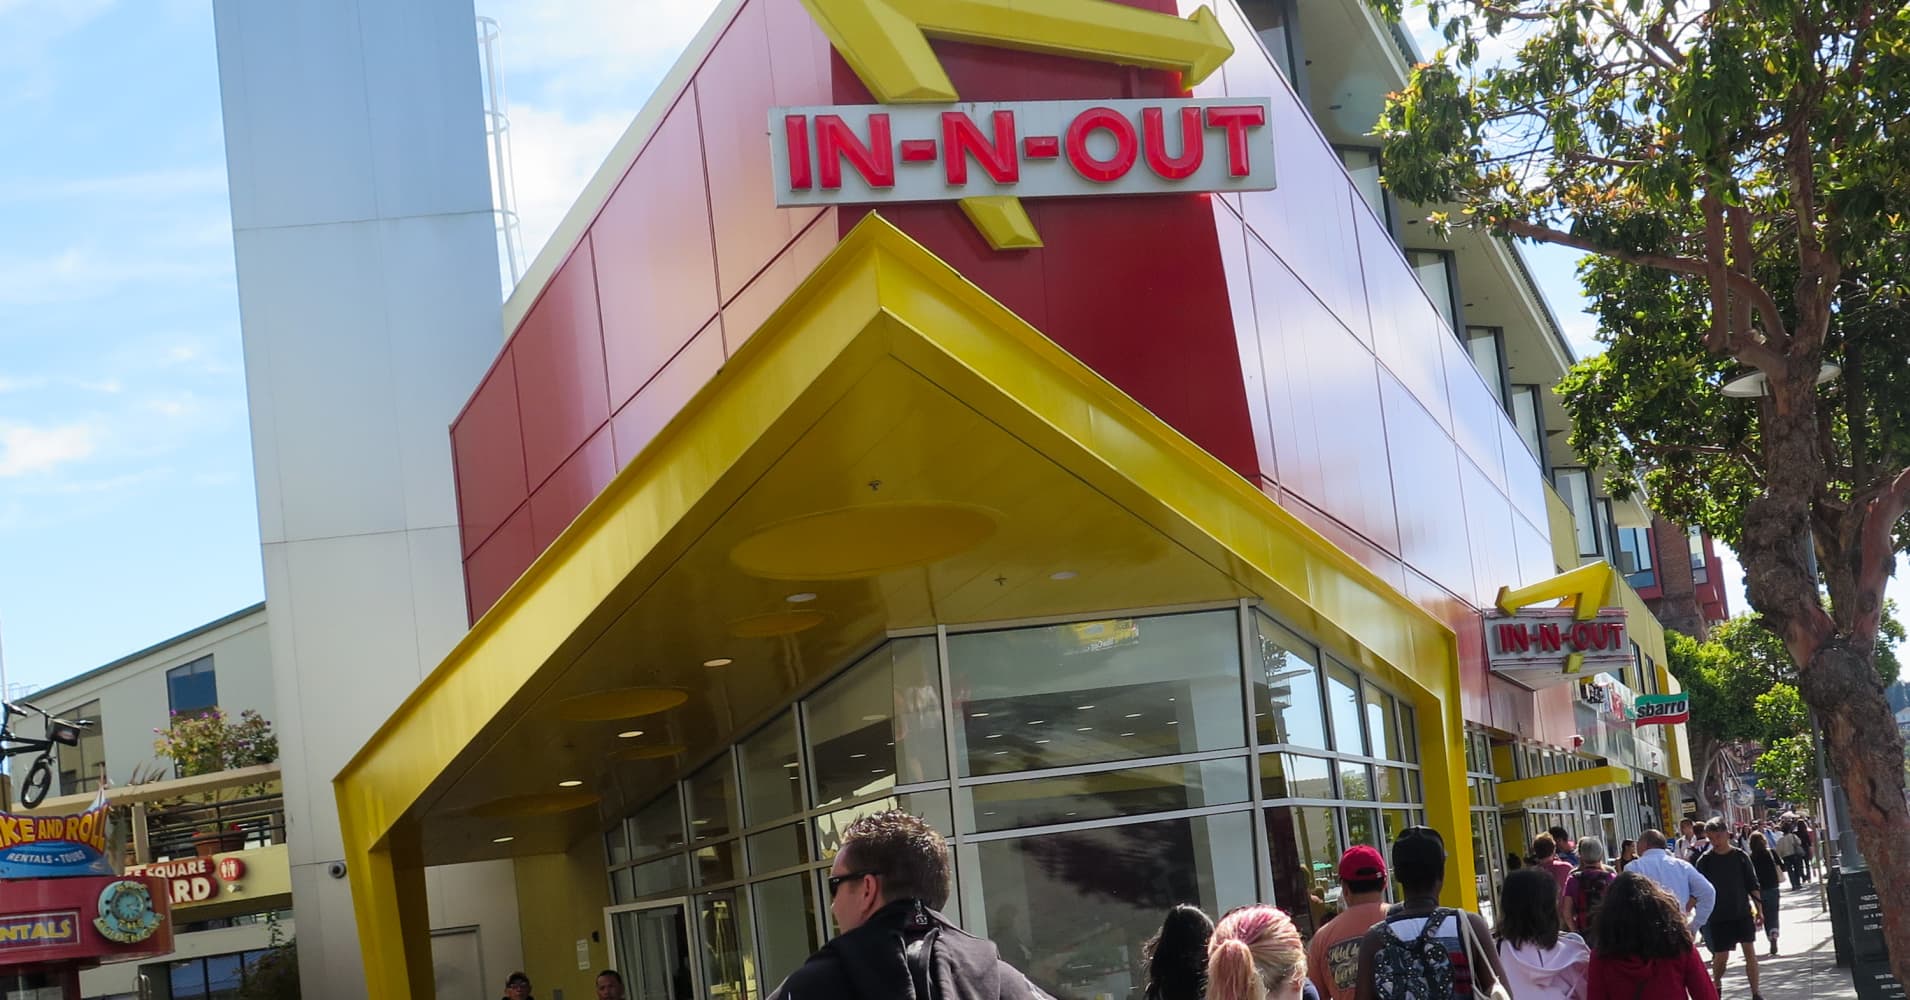 In-N-Out Burger faces boycott for California GOP donation